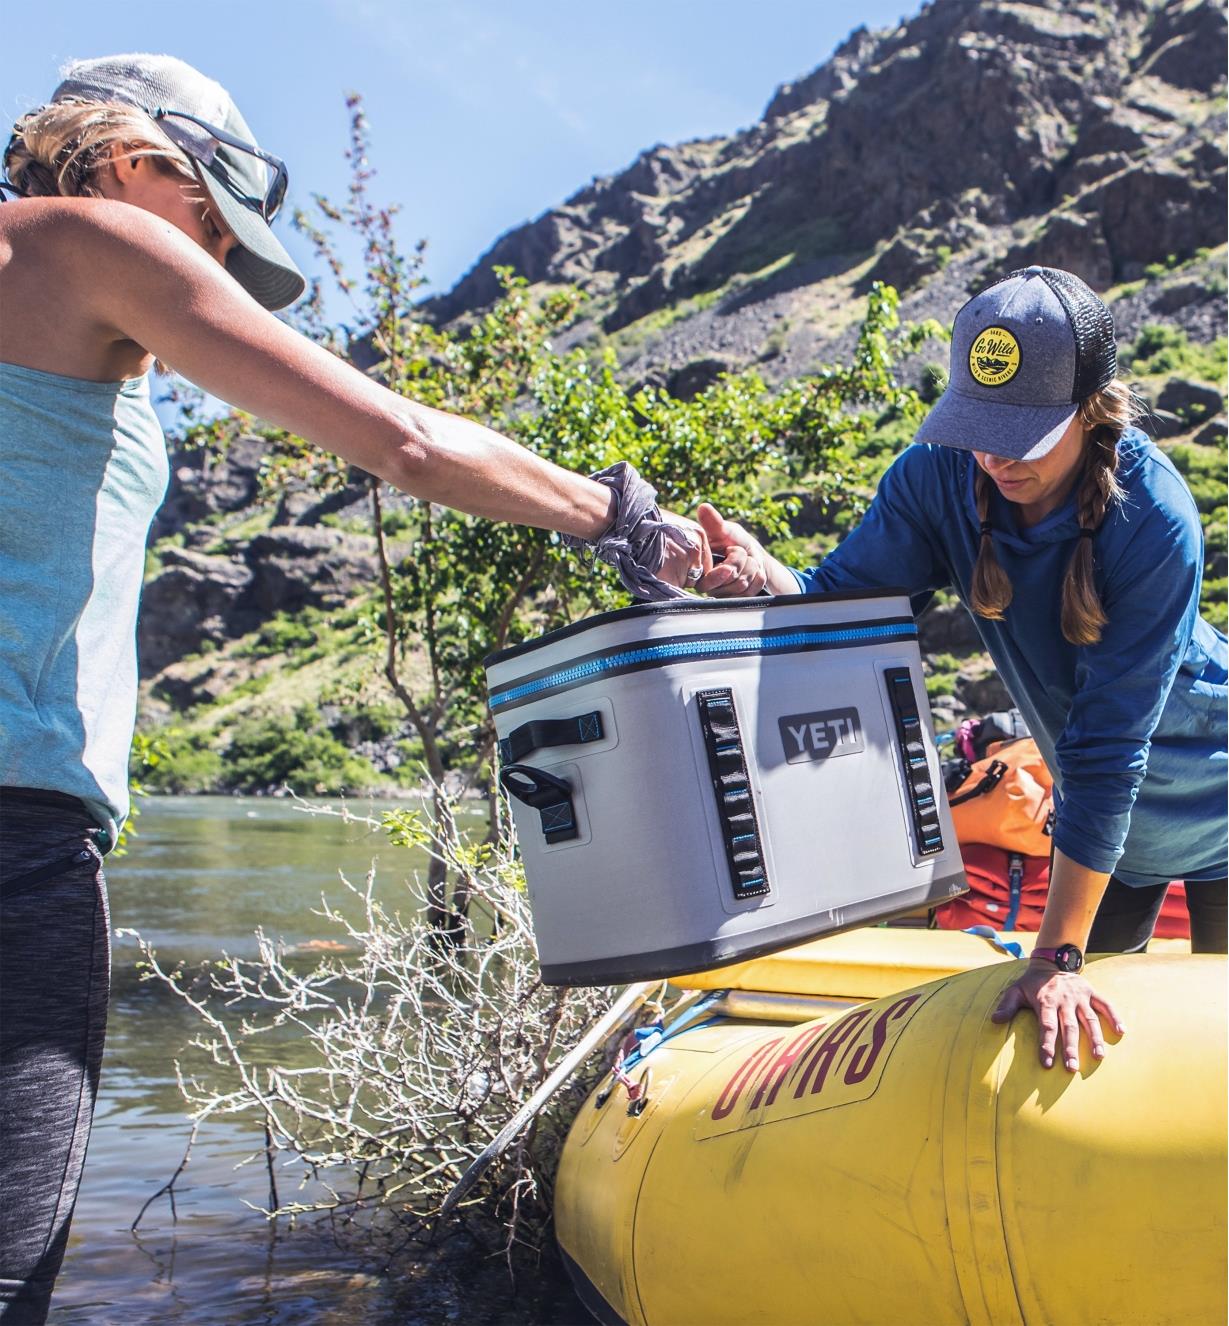 A man and woman load a Yeti Hopper cooler into a raft